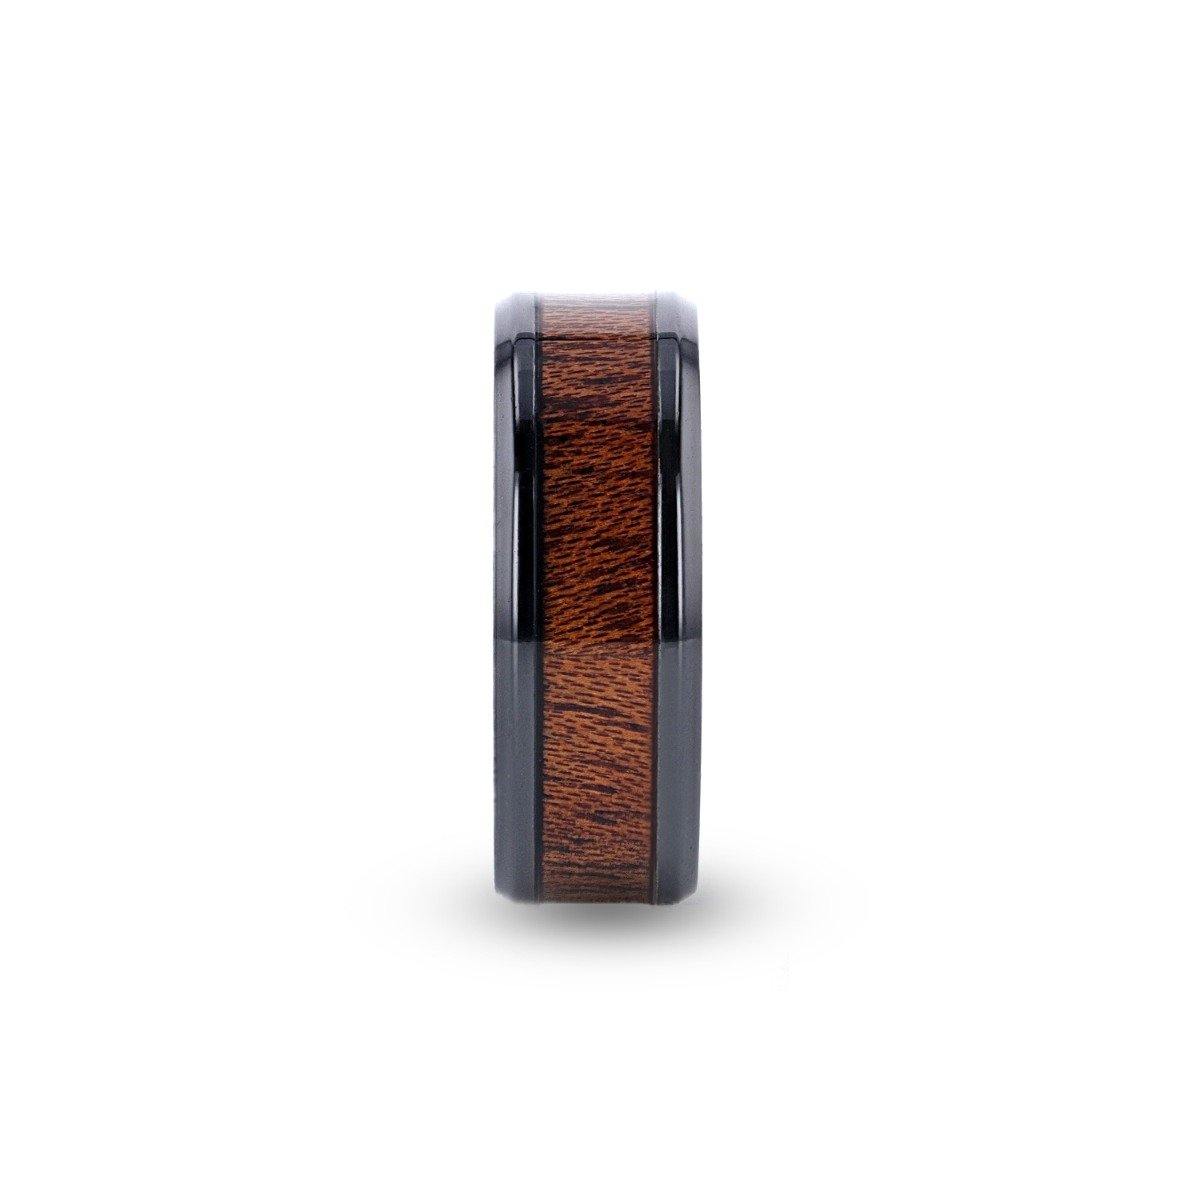 DOMINICA - Black Titanium Band with Polished Bevels and Exotic Mahogany Hard Wood Inlay - 8 mm - The Rutile Ltd